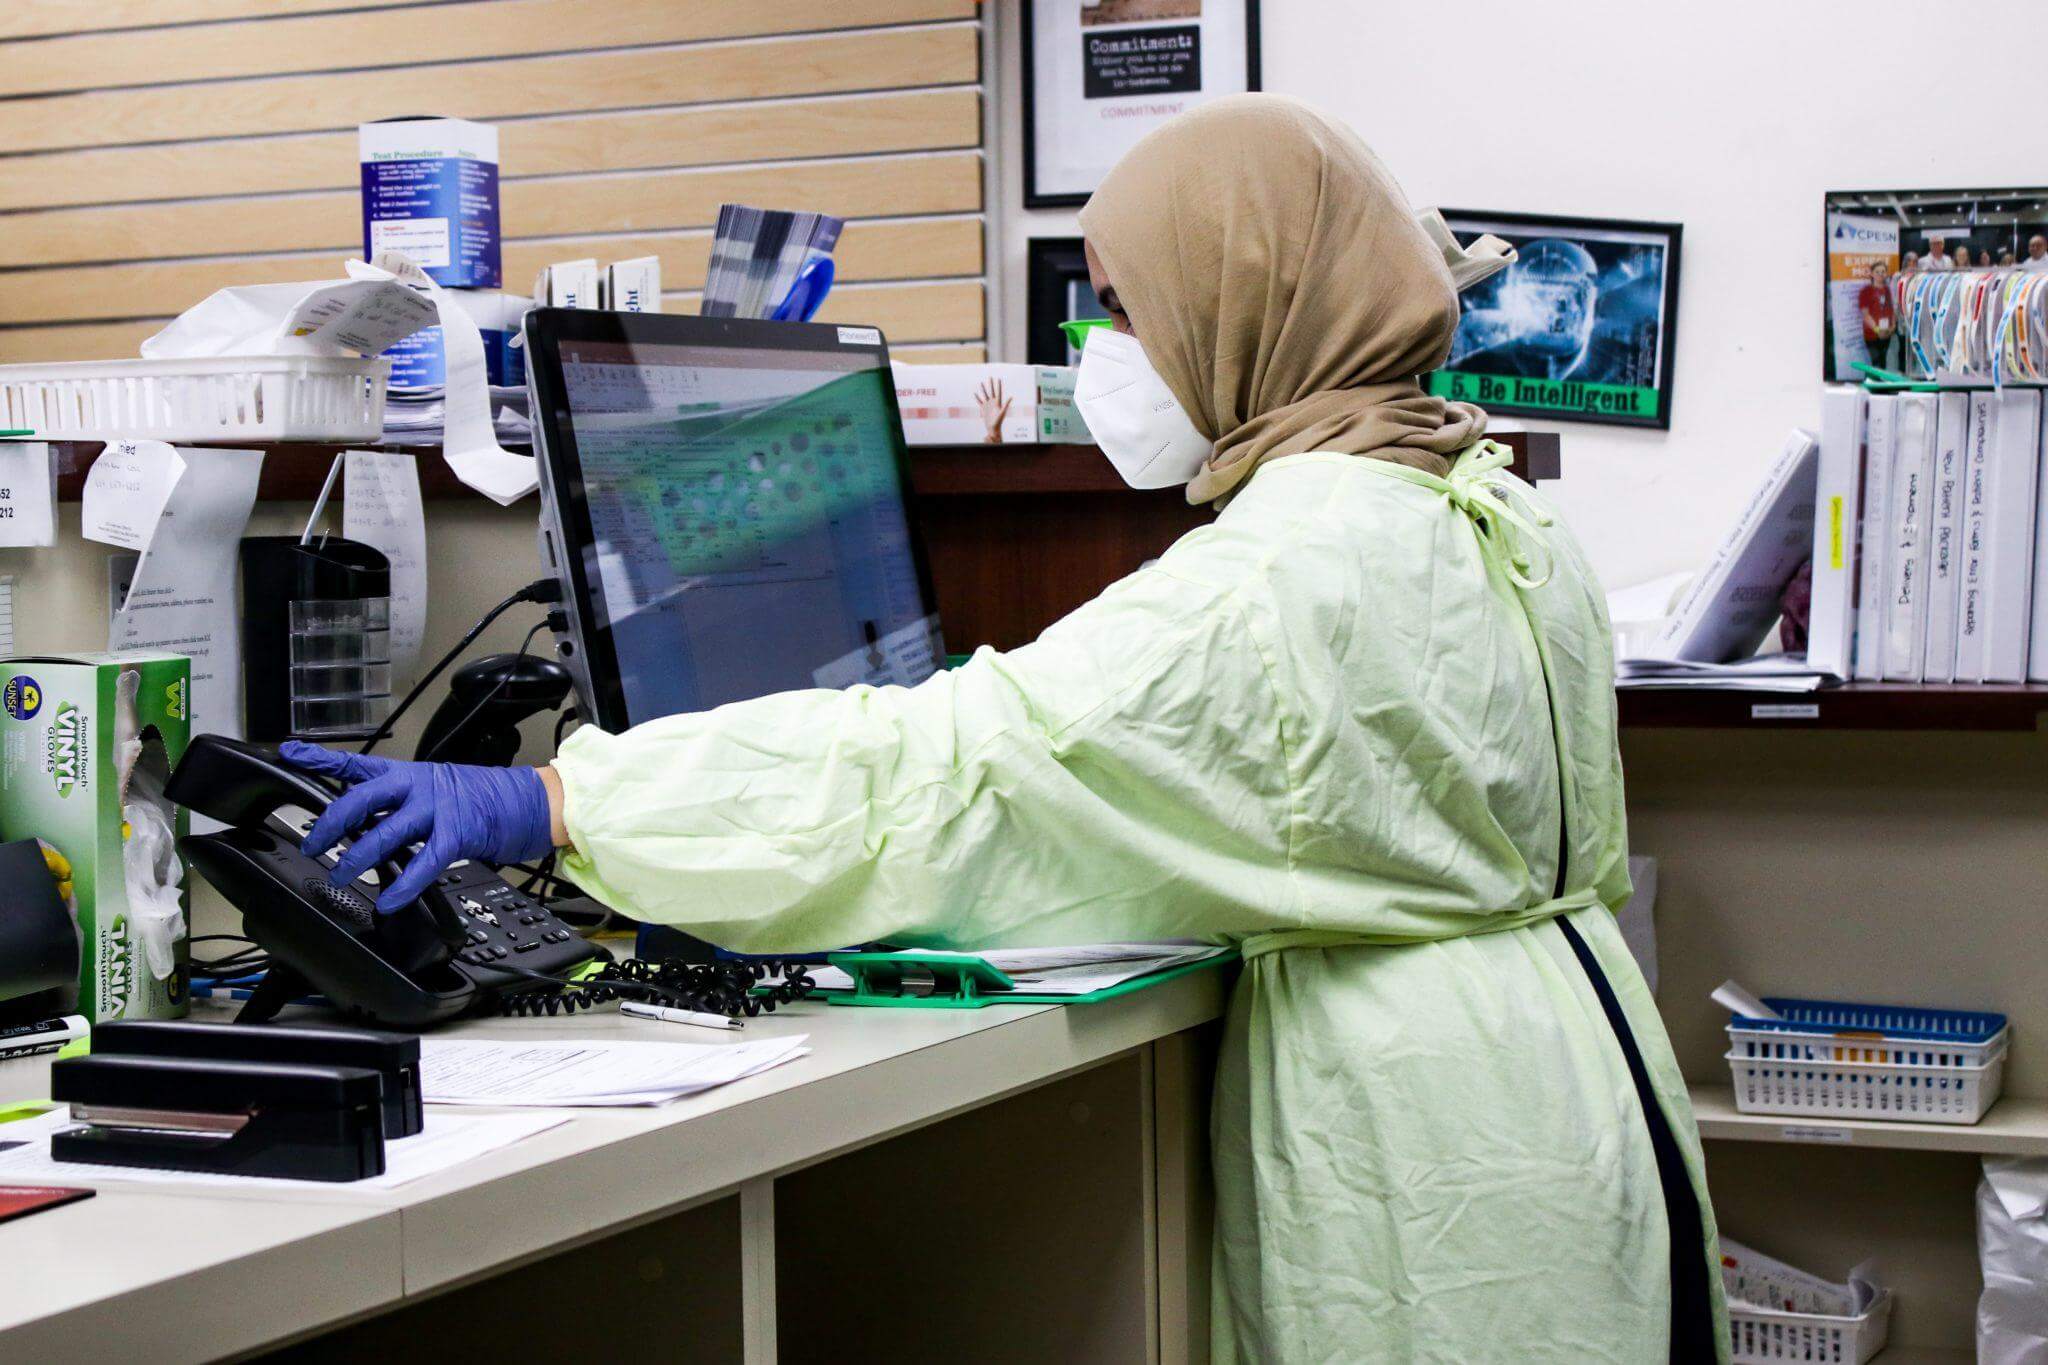 Pharmacy worker reaching for telephone while workinig on a laptop.